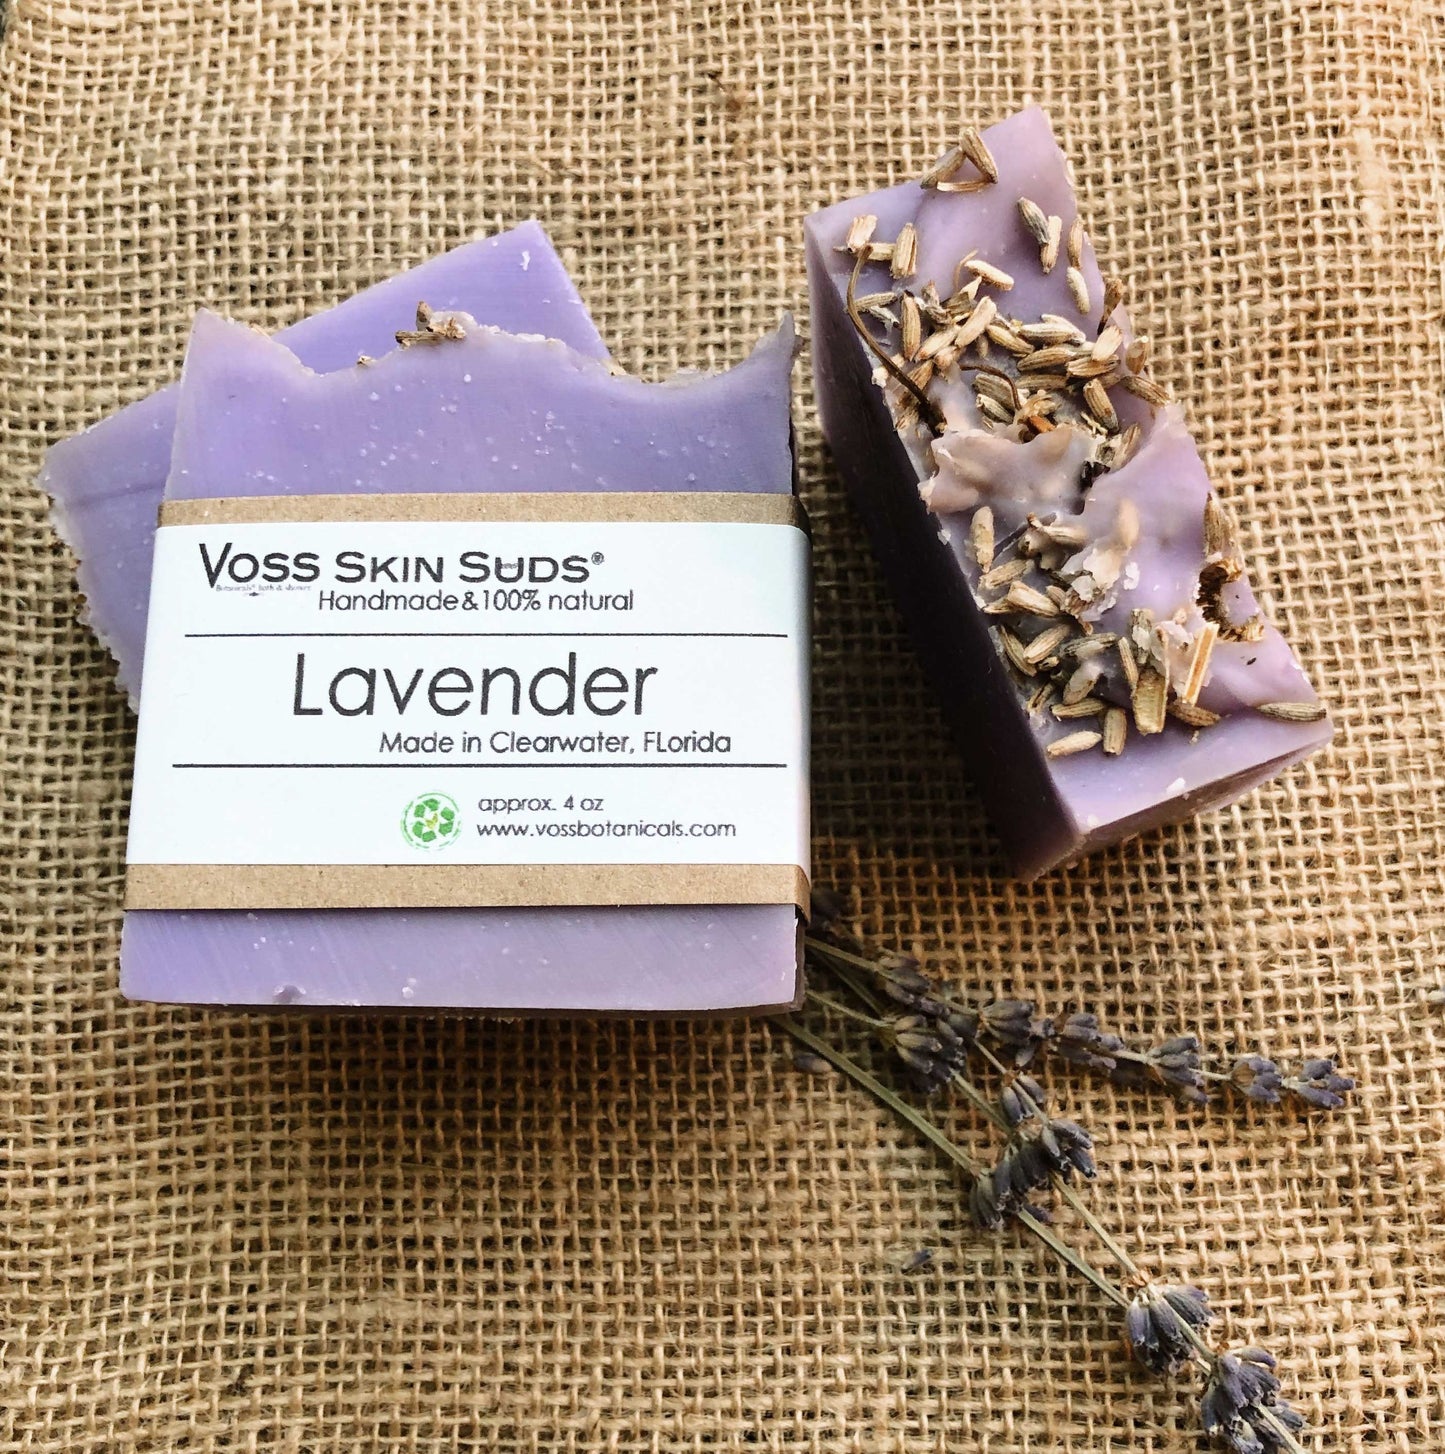 Lavender soap PRODUCT FOOTPRINTS Natural ingredients Phthalate, Sulfate, Petroleum & Paraben Free Vegan Free of Synthetic Fragrances Free of Synthetic Dyes GMO & Gluten-free Non Toxic Handmade Sustainable Innovation Made in the USA Cruelty Free Zero Waste Low Carbon Footprint eco friendly   Holiday care package gift box gift for her relaxation gift self care box self care gift box spa gift box spa gift set thank you gift box birthday gift new mom gift relaxing bath set spa gift set spa kit